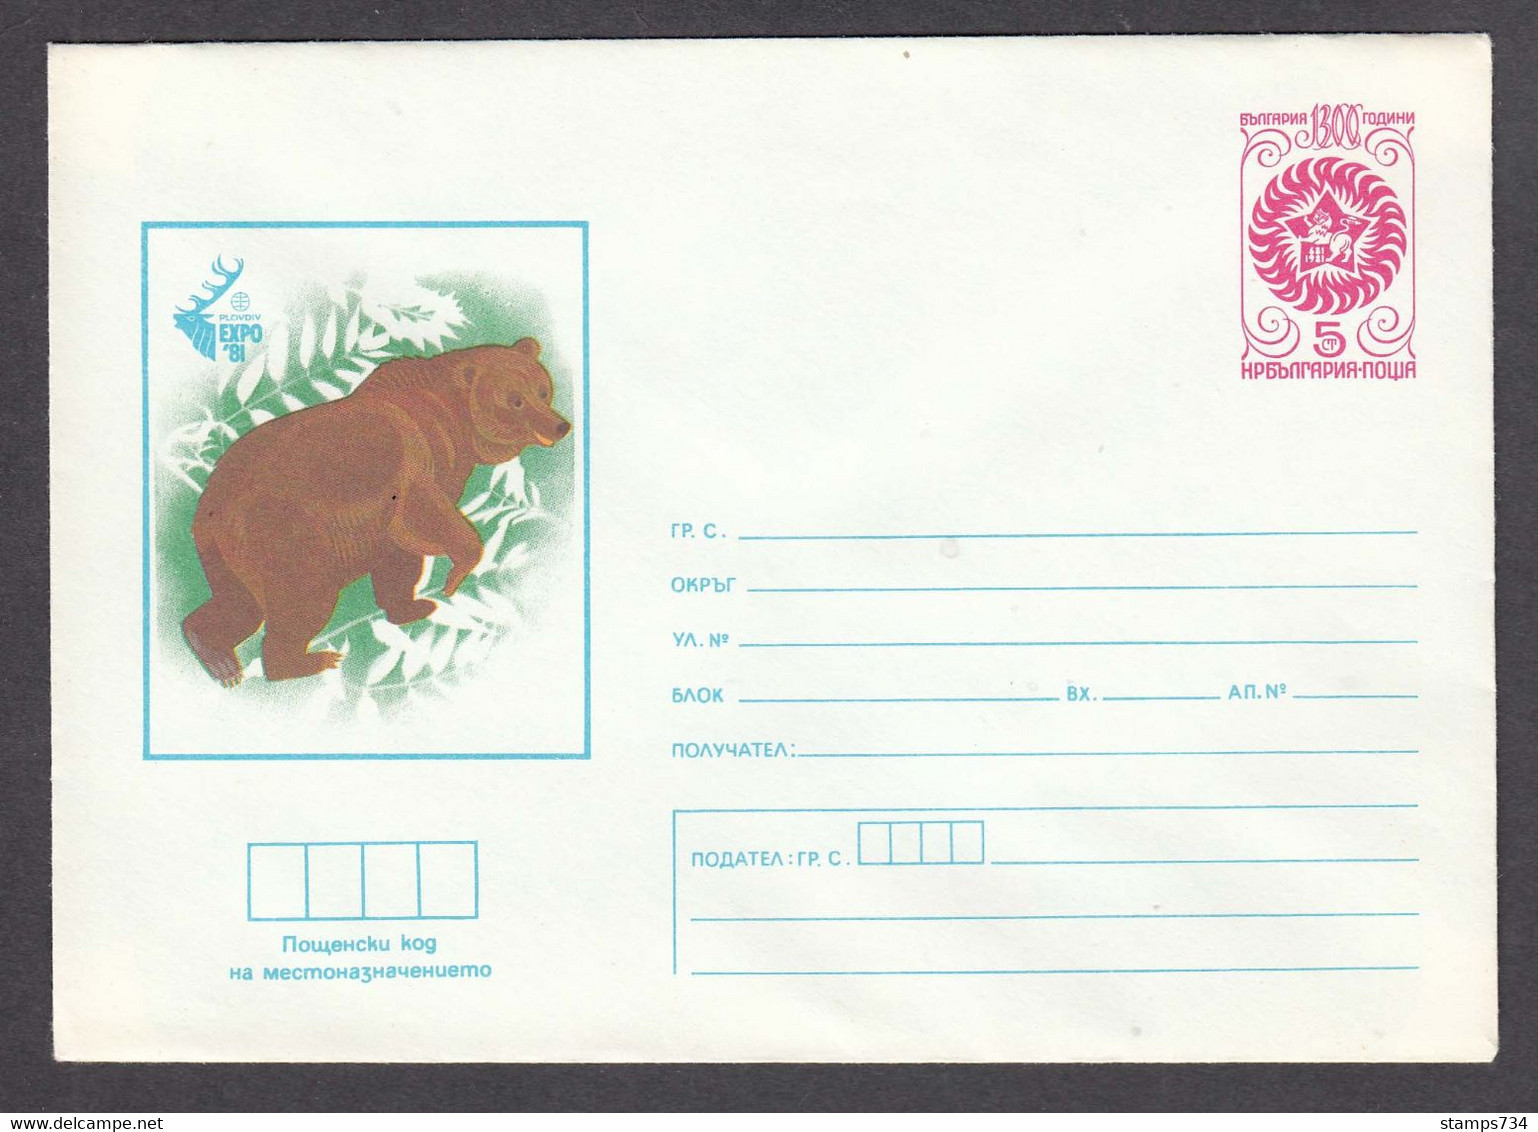 PS 784/1981 - Mint, EXPO'81: Brown Bear, Post. Stationery - Bulgaria - Covers